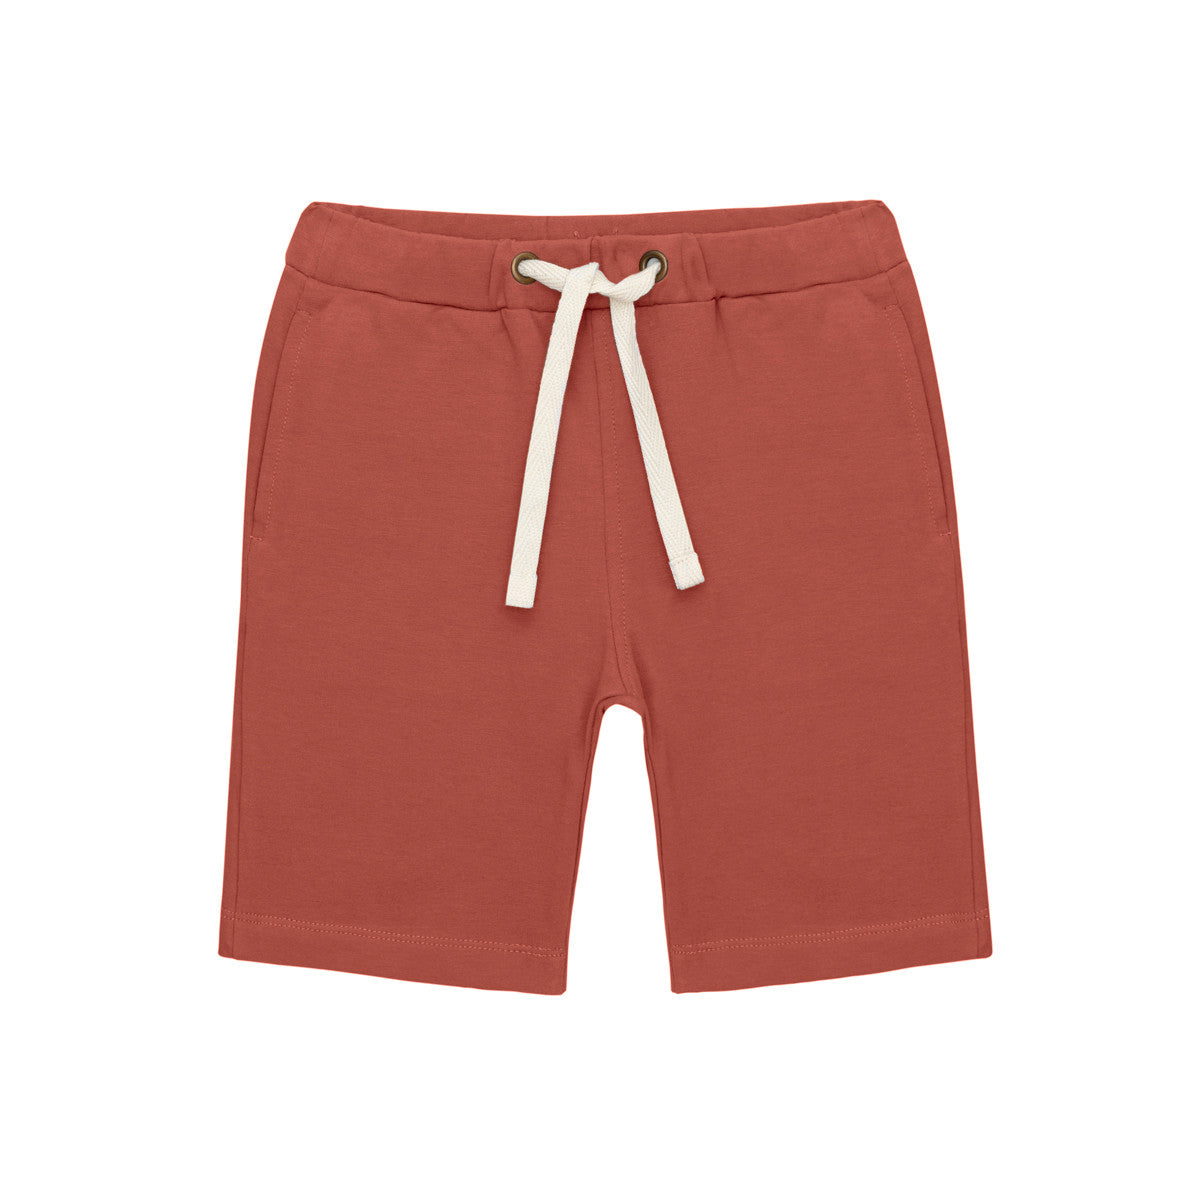 Little Hedonist super comfy organic surfer shorts in Potters Clay made from our softest organic cotton. Sustainable kids clothing for boys and girls.